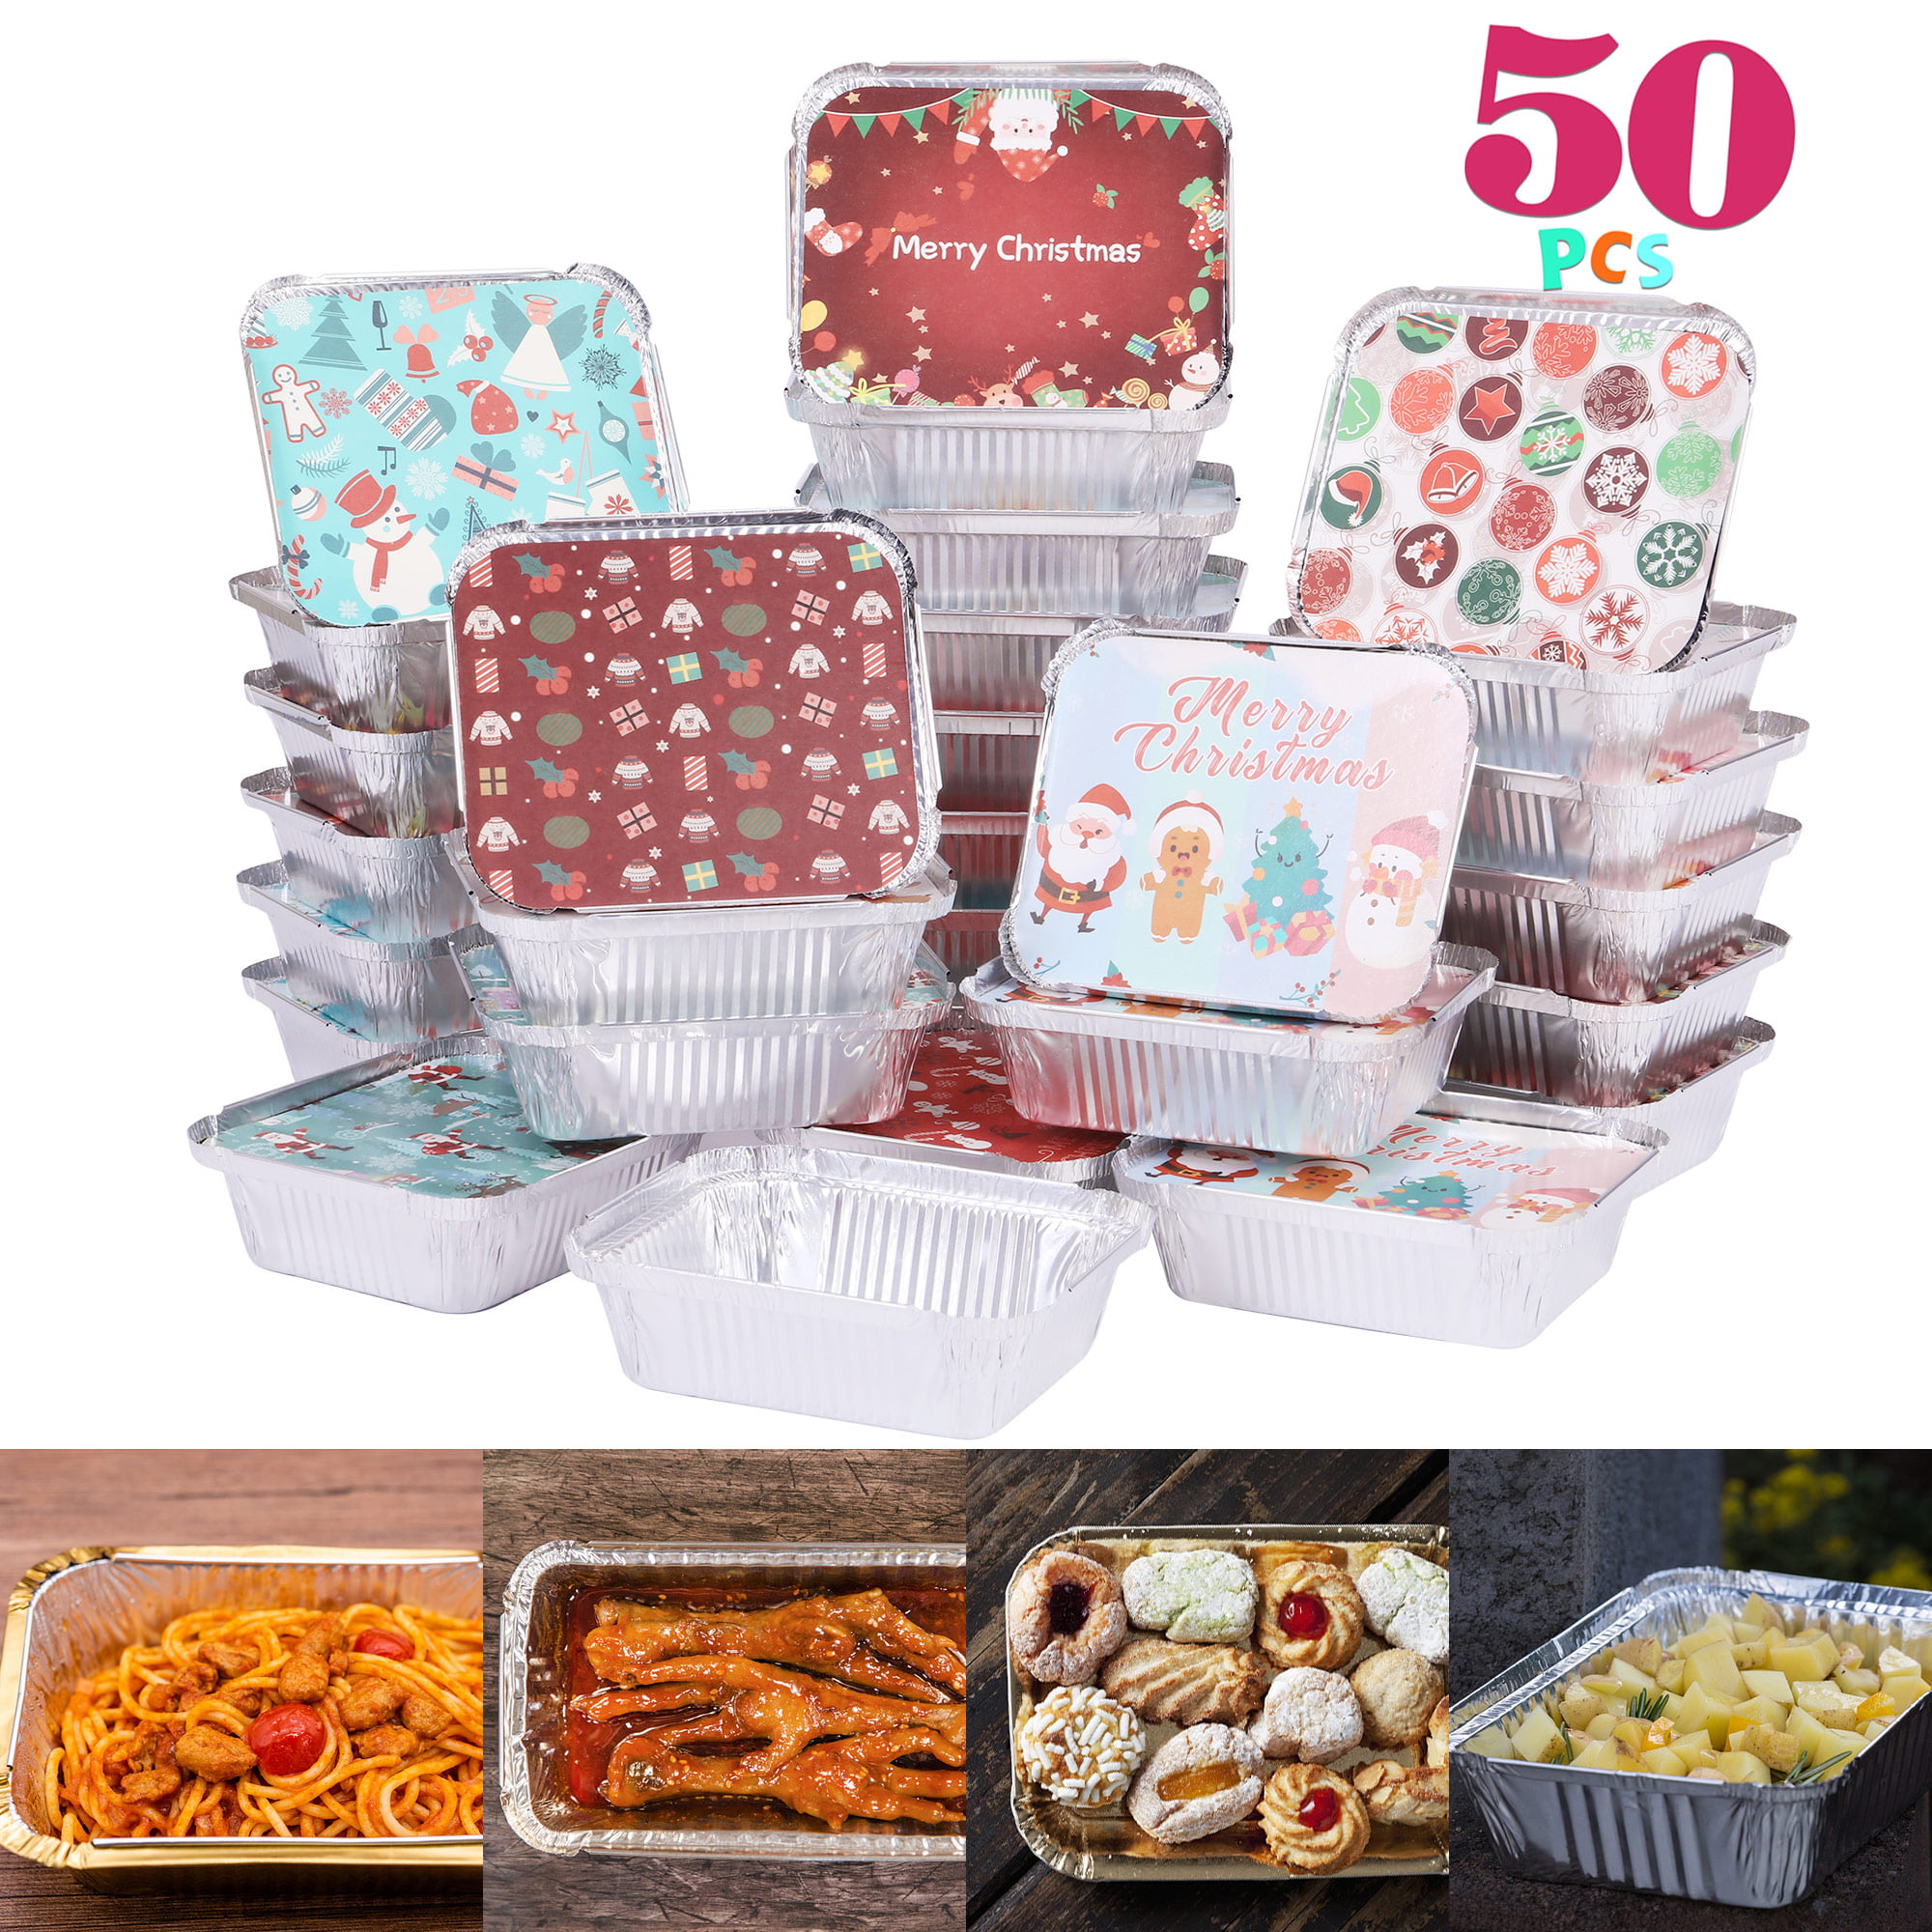 Joyin 48 Pcs Christmas Cookie Tins with Lids for Gift Giving, Rectangular Treat Foil Containers, Tupperware Disposable Food Storage Pan for Holiday